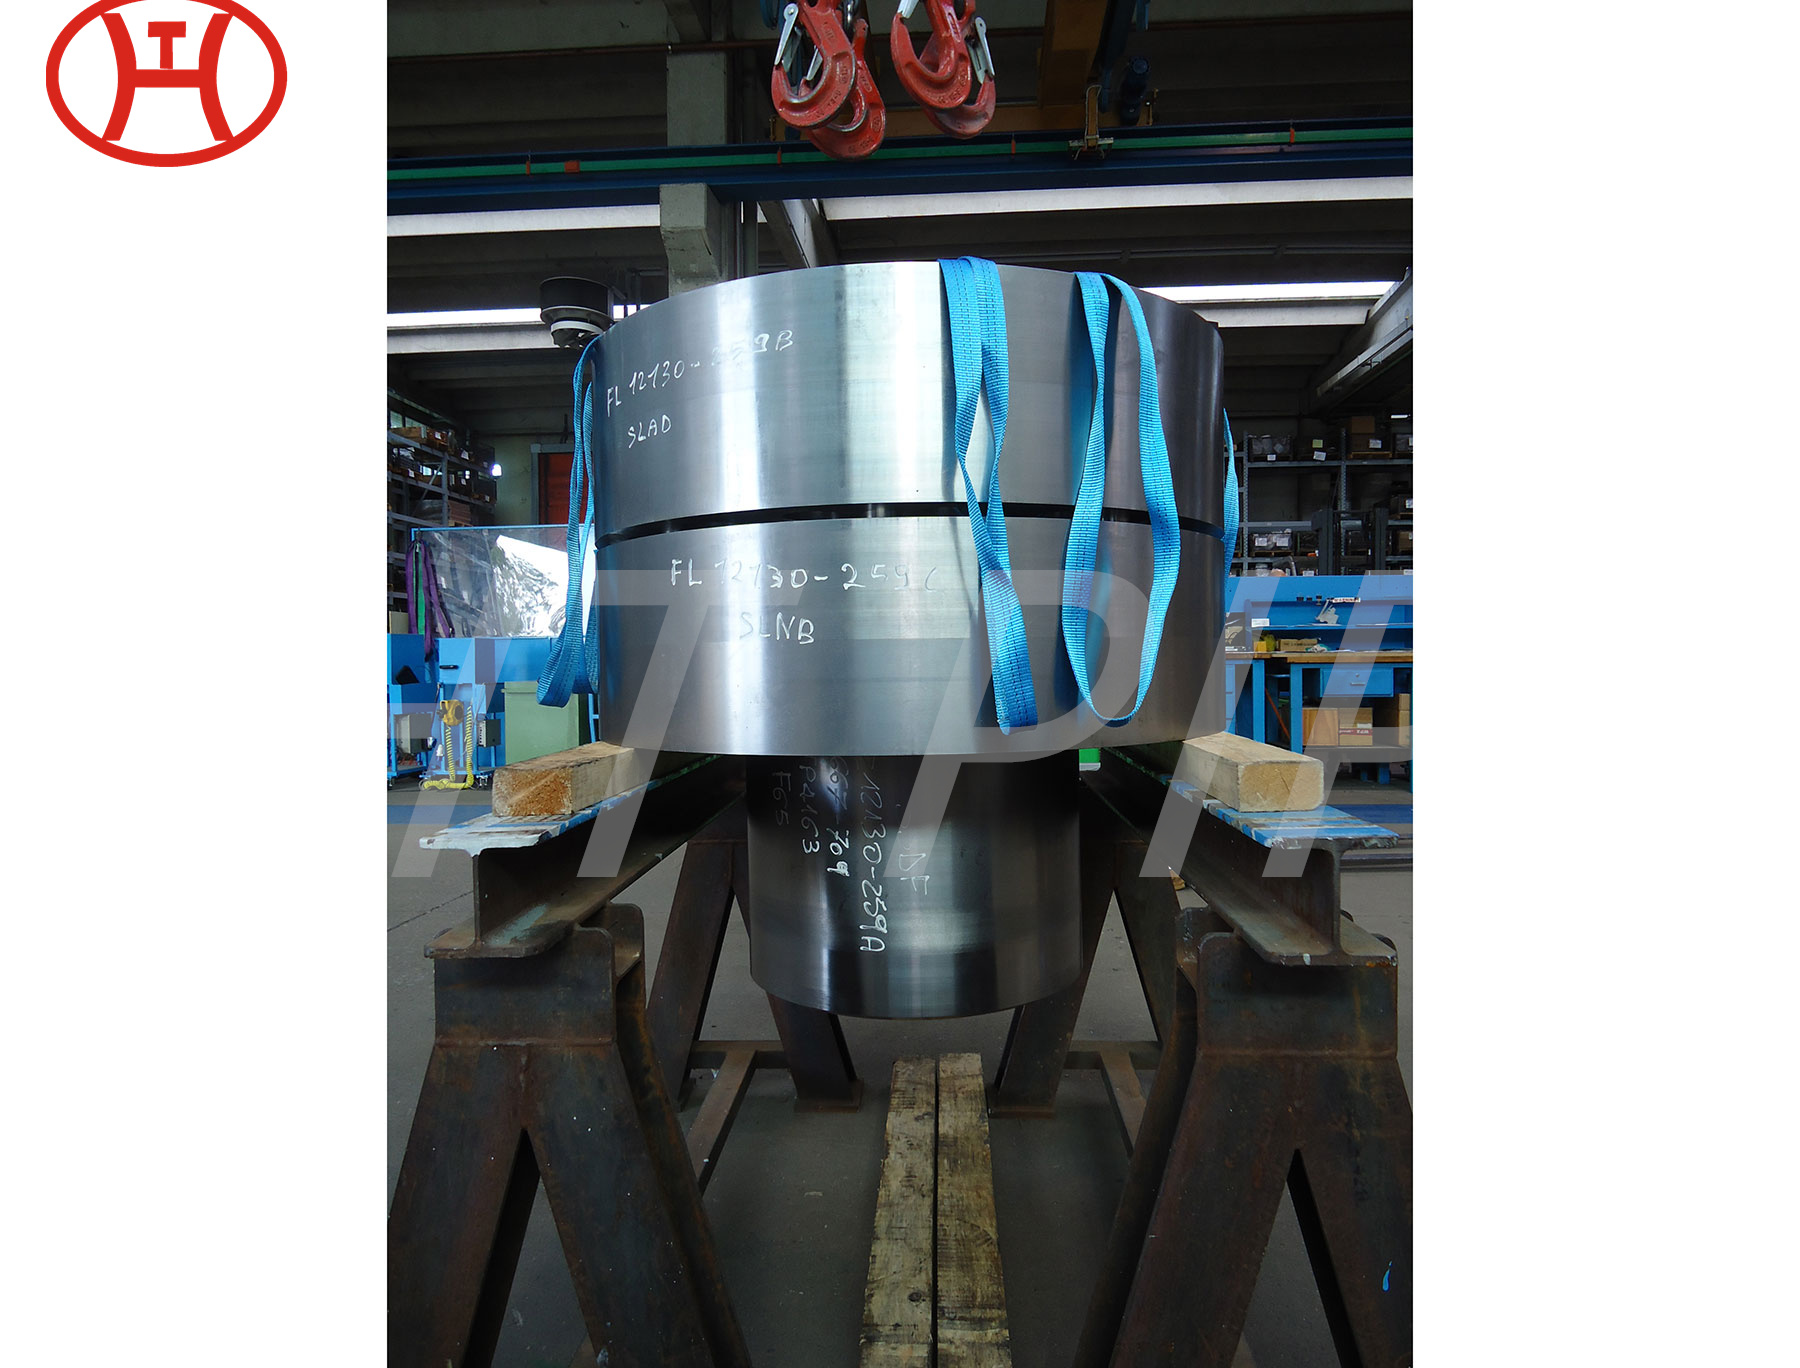 ASTM A182 F5 F11 F12 F91 flanges to special fabrications for deliveries